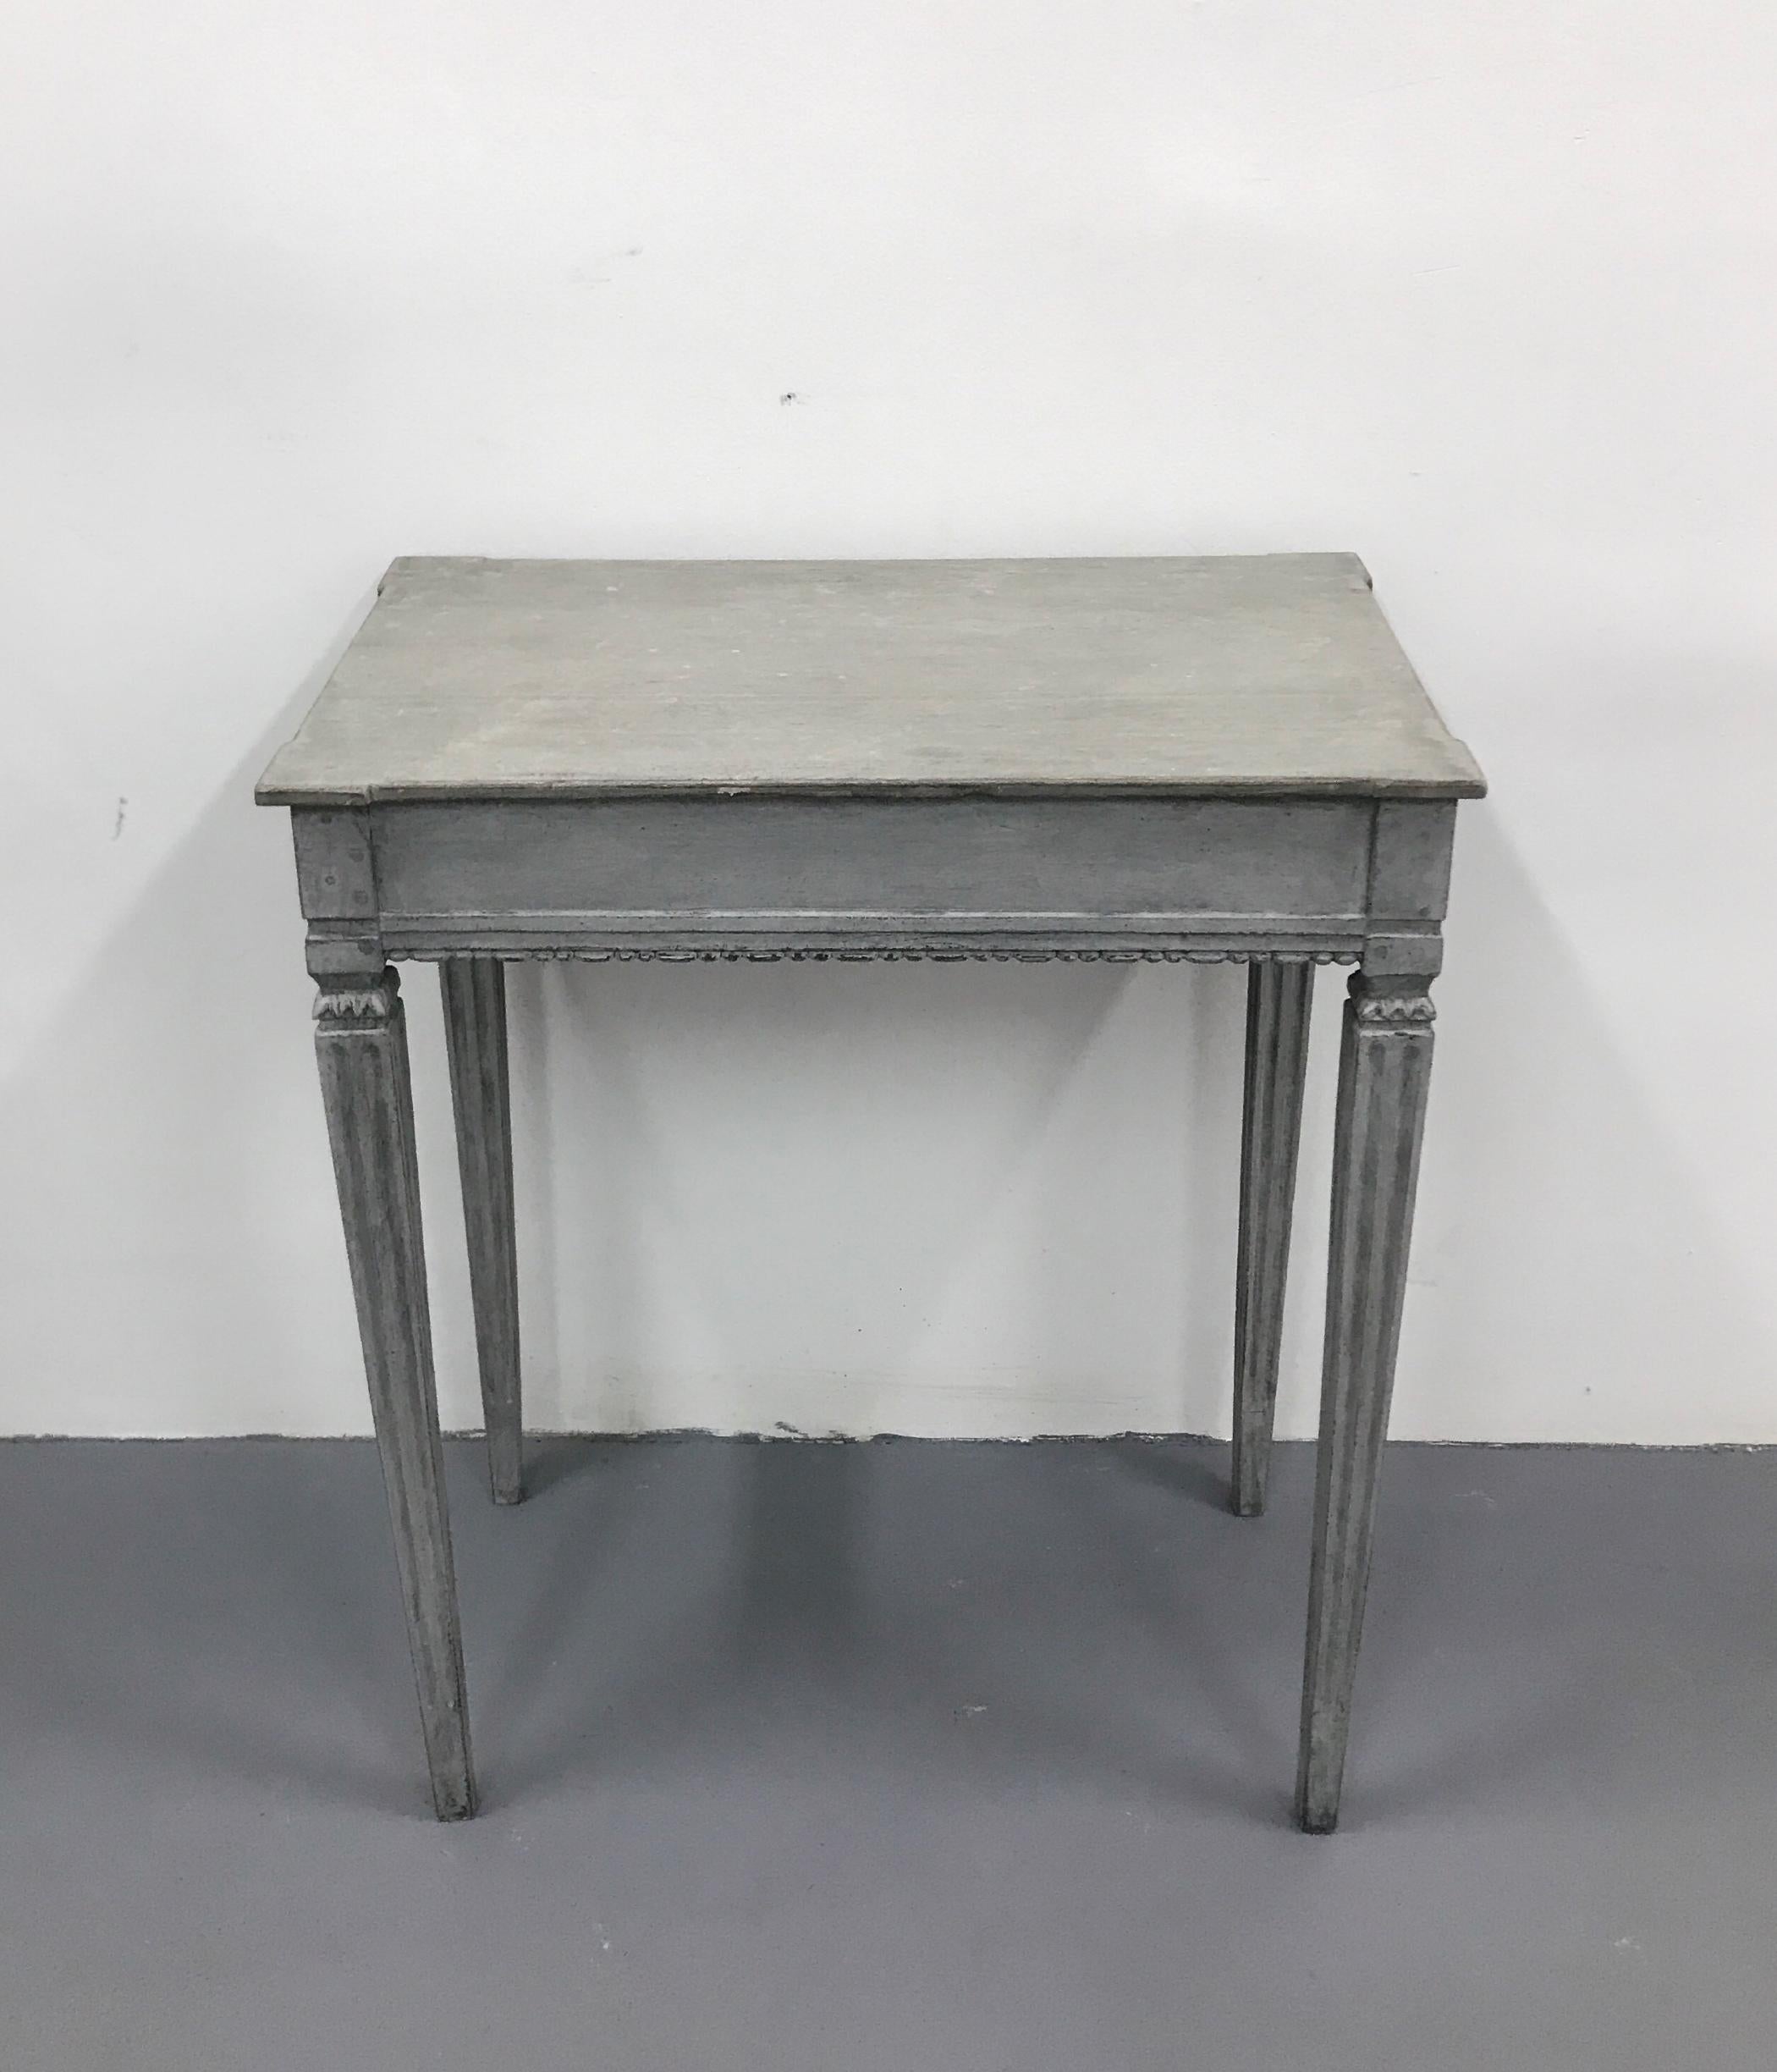 Gustavian style side table with beautiful decoration in a grey and light grey color a table for slender, long legs, tapered downwards. There are vertical cutters on the legs.